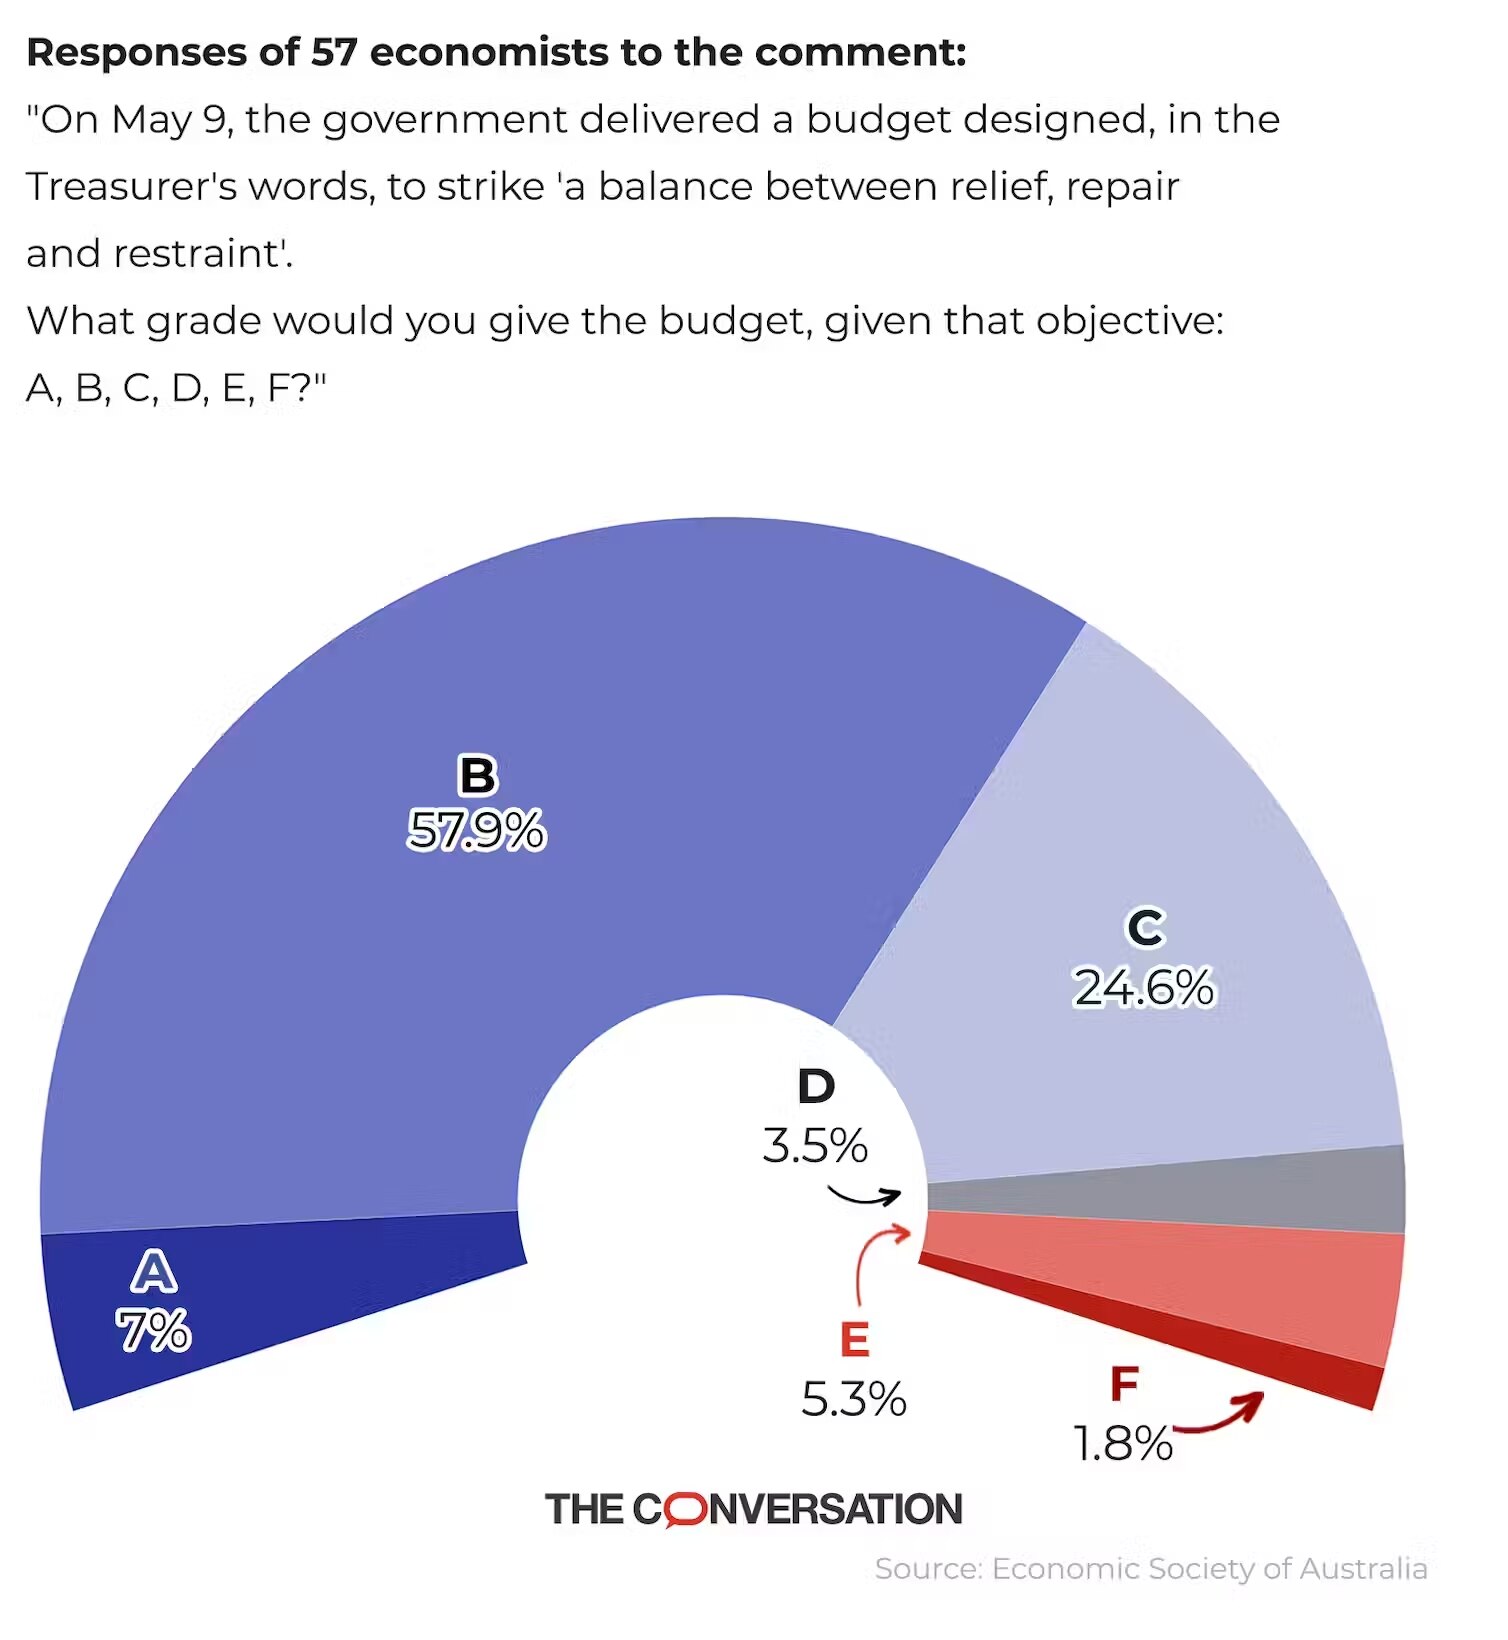 A part pie chart shows the proportion of 57 economists who scored the budget A, B, C, D, E or F